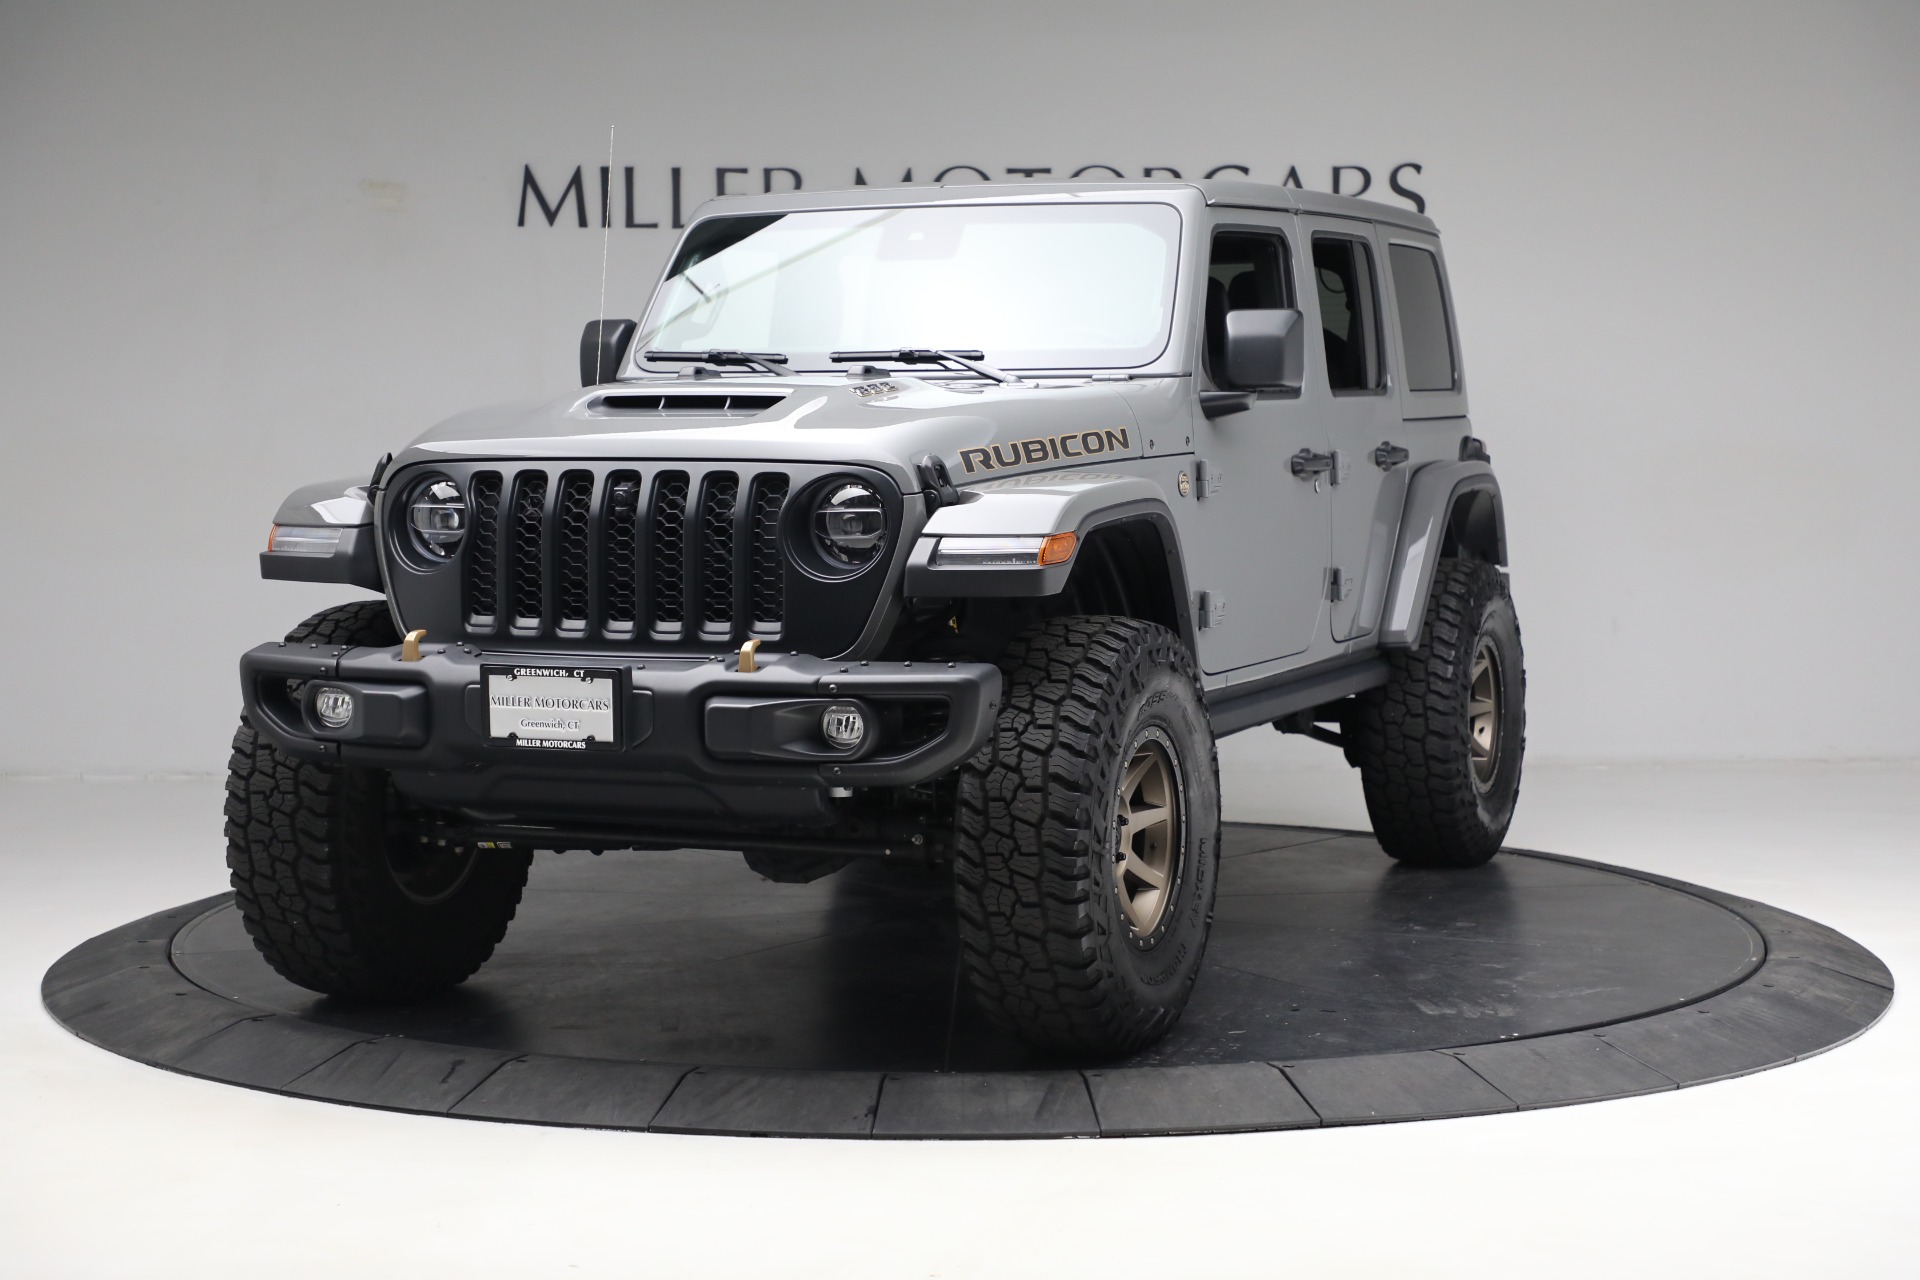 Used 2021 Jeep Wrangler Unlimited Rubicon 392 for sale $81,900 at Rolls-Royce Motor Cars Greenwich in Greenwich CT 06830 1